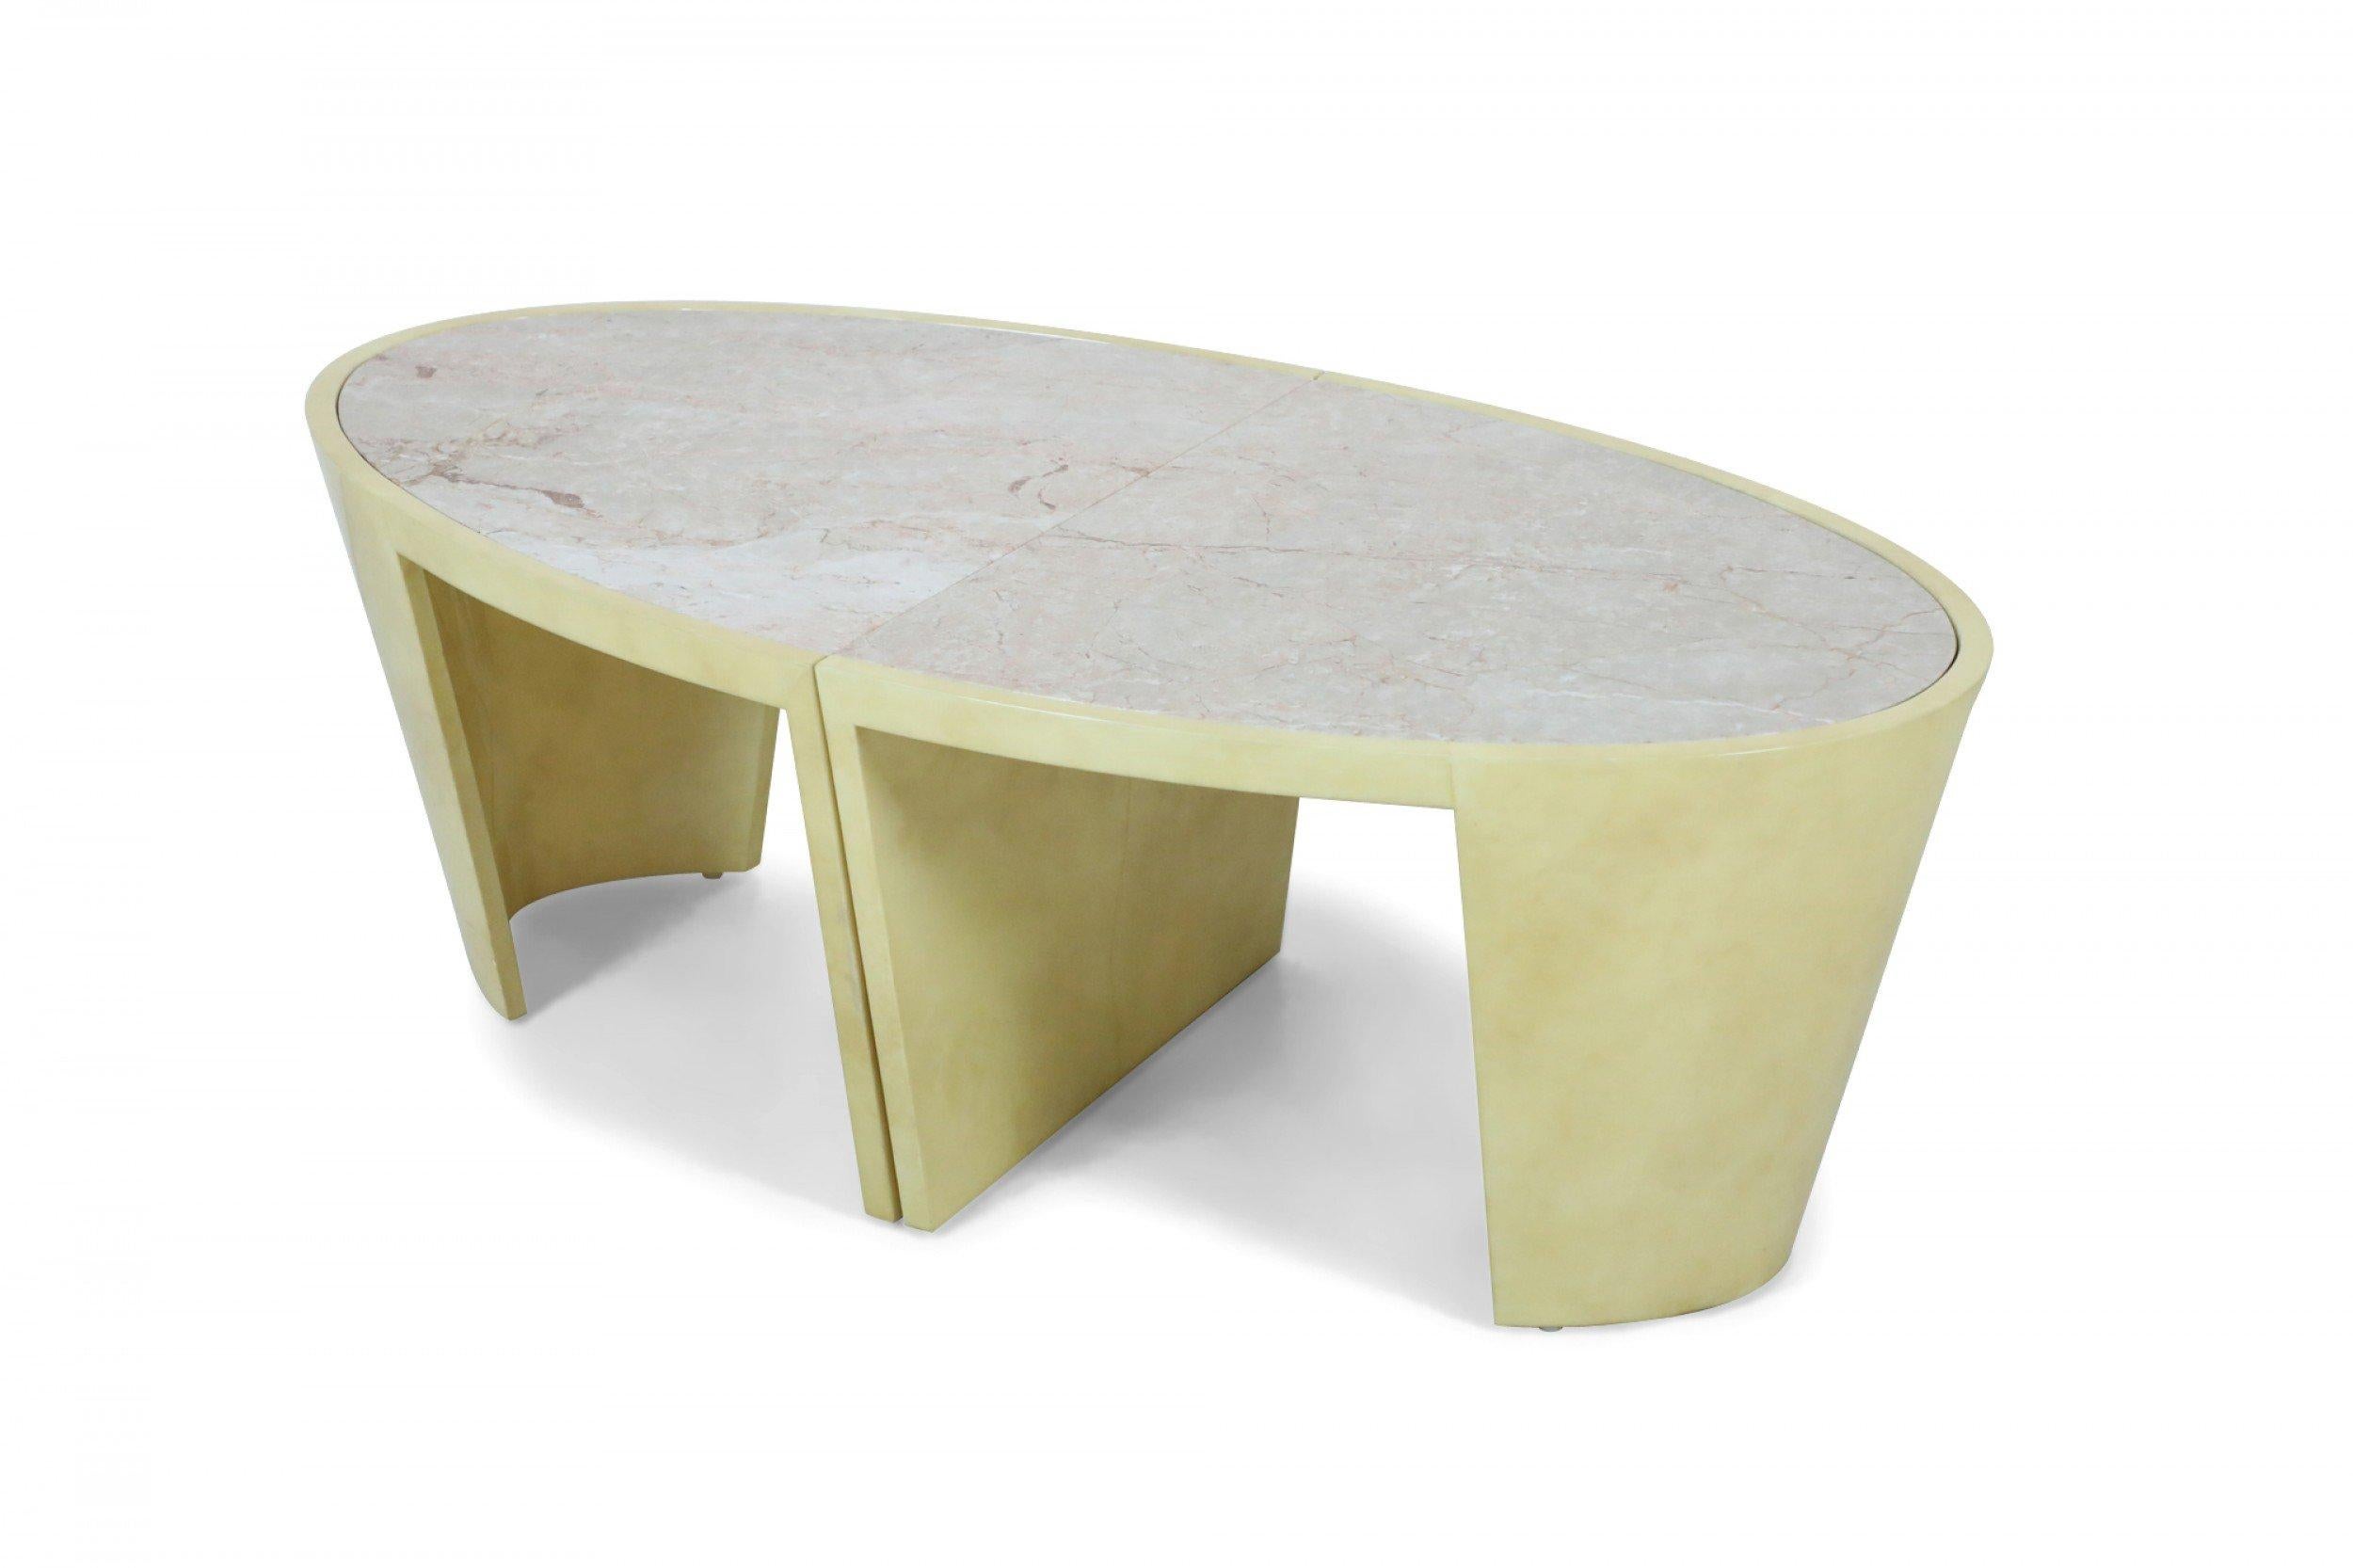 Italian Post-Modern oval coffee table in two sections with parchment veneer bases supporting beige Breccia Onitiata marble tops.